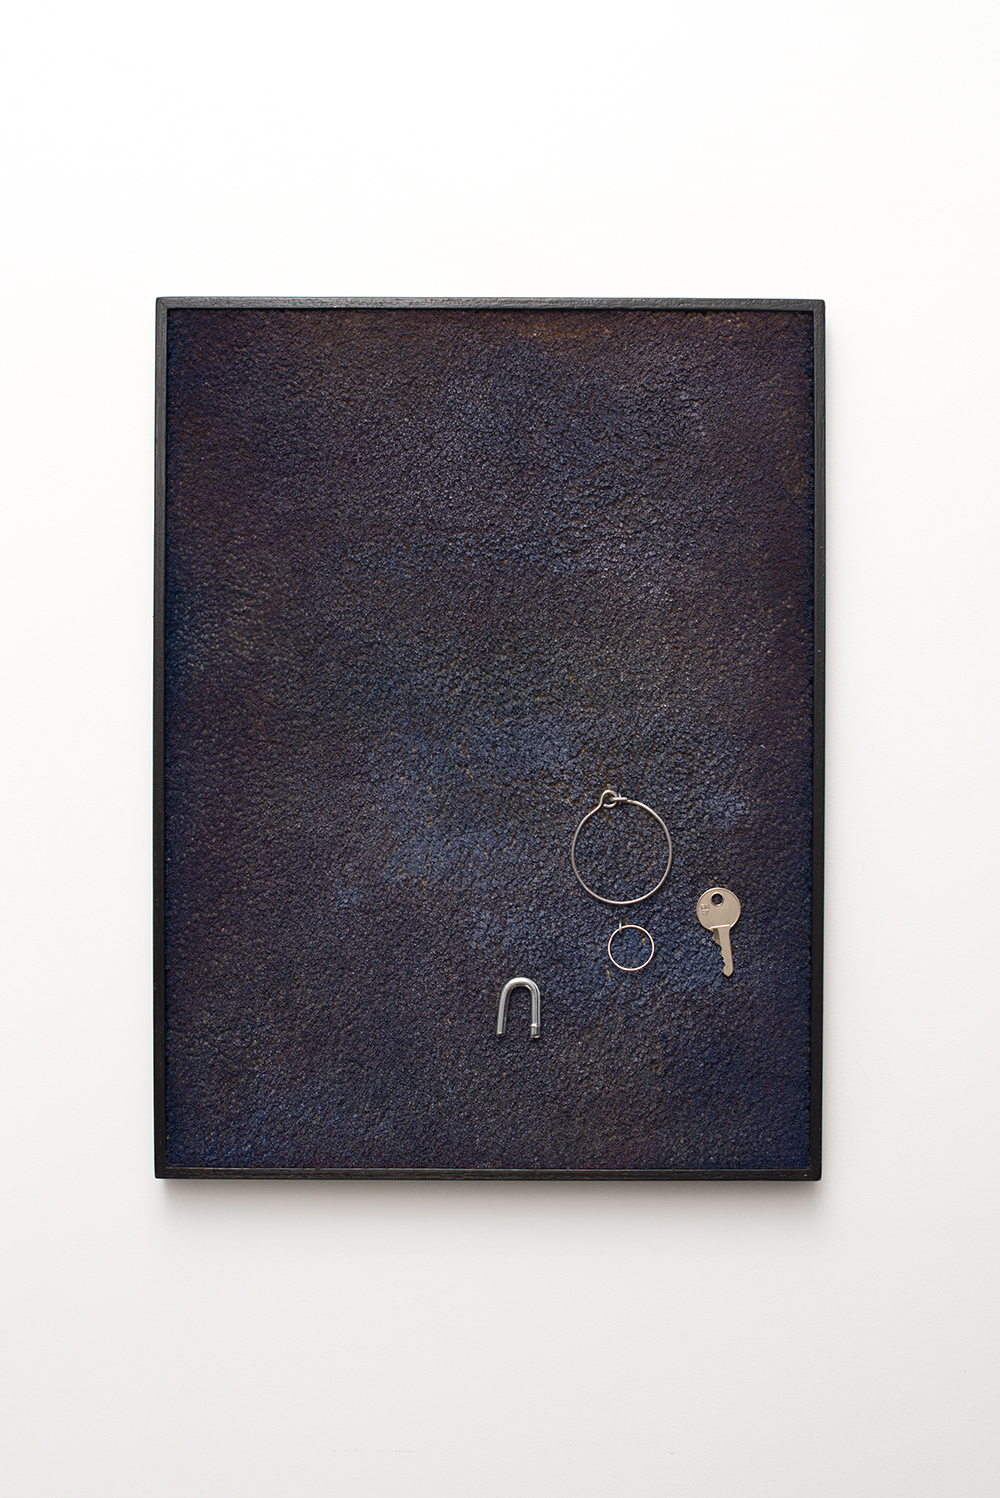 ISABELLE CORNARO - Golden Memories (Miscellaneous Nickel Plated Objects)